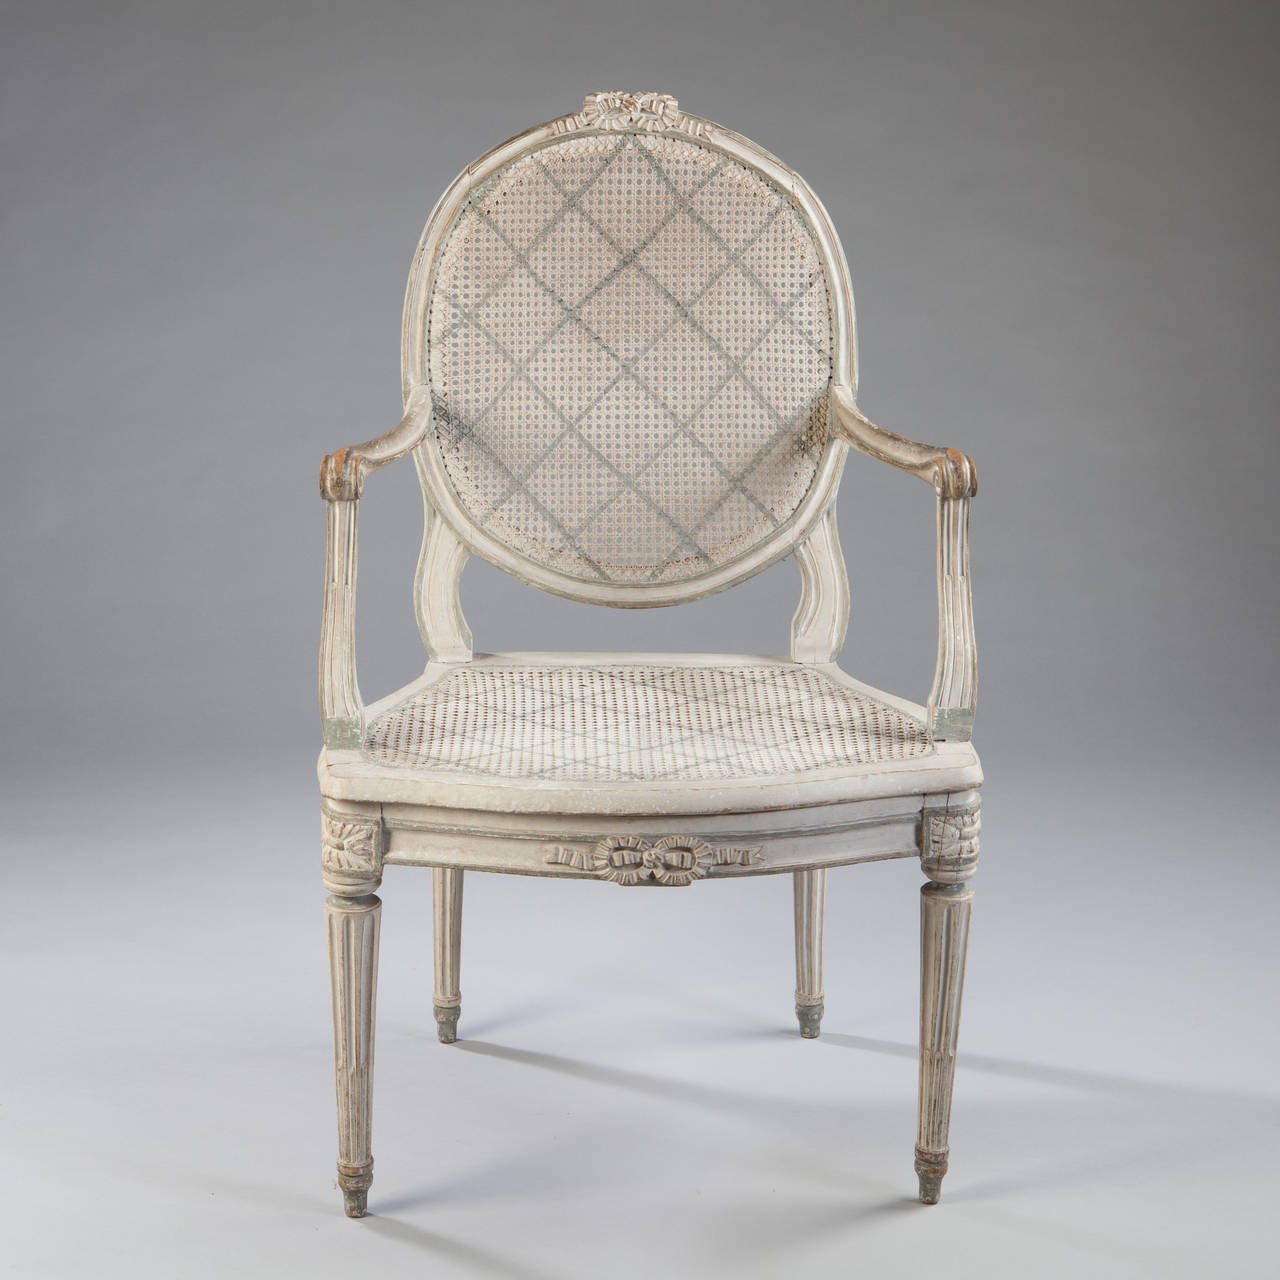 A fine pair of mid 18th century painted open arm chairs with oval frames surmounted by a bow, the backs and seats caned all supported on fluted tapering legs.